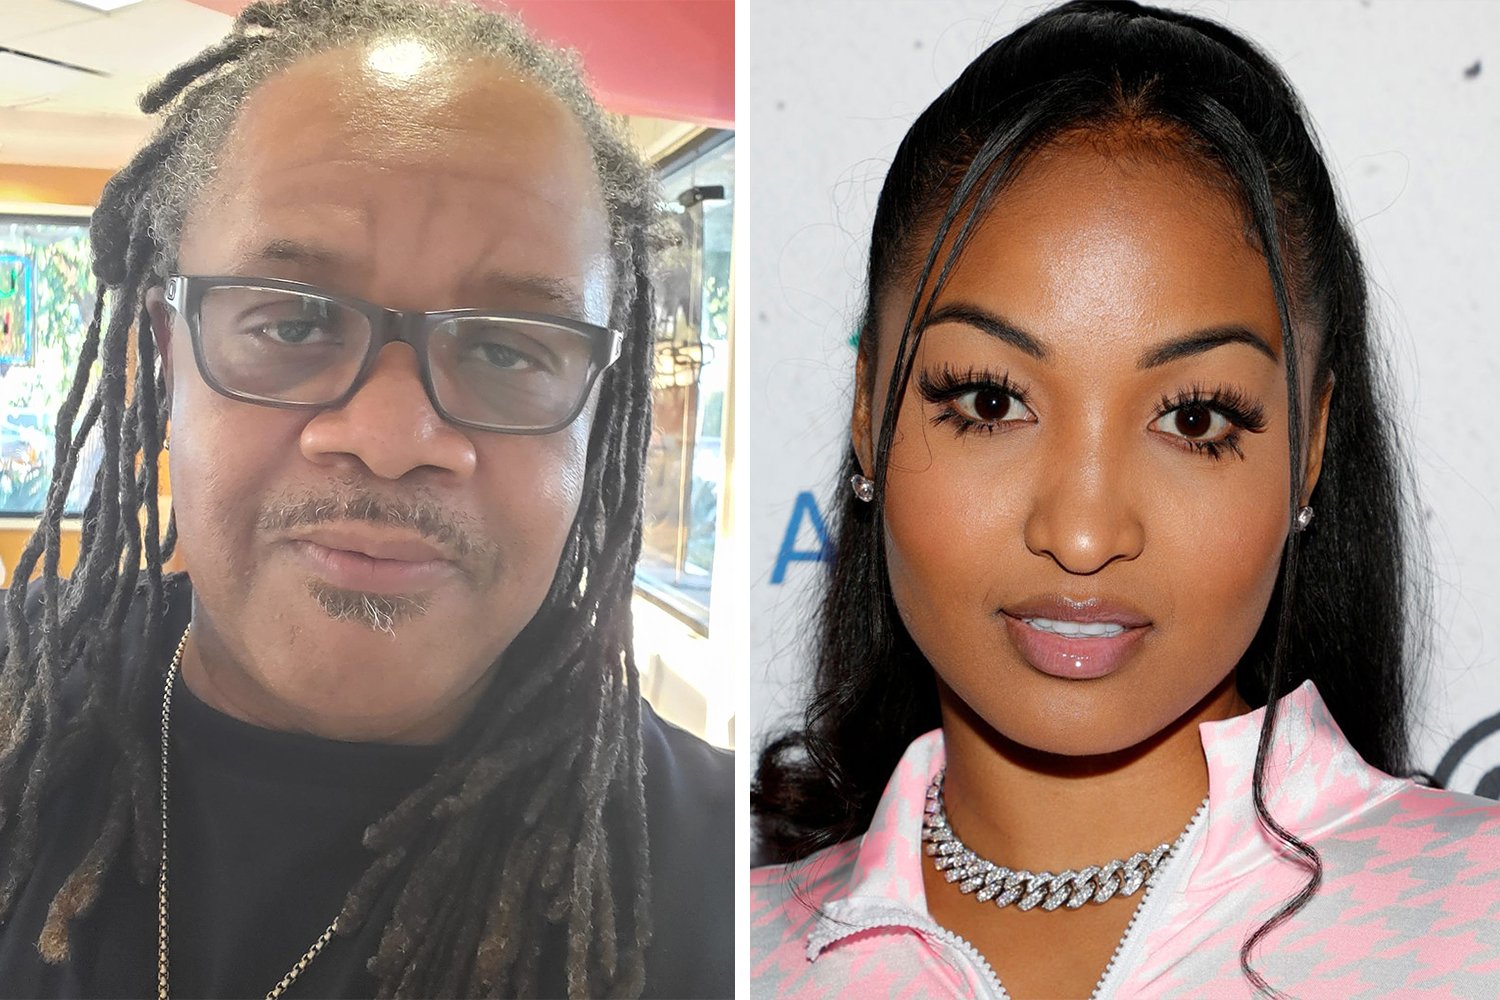 Producer Opts For New Lawyers Amid Settlement Talks With Shenseea, UMG